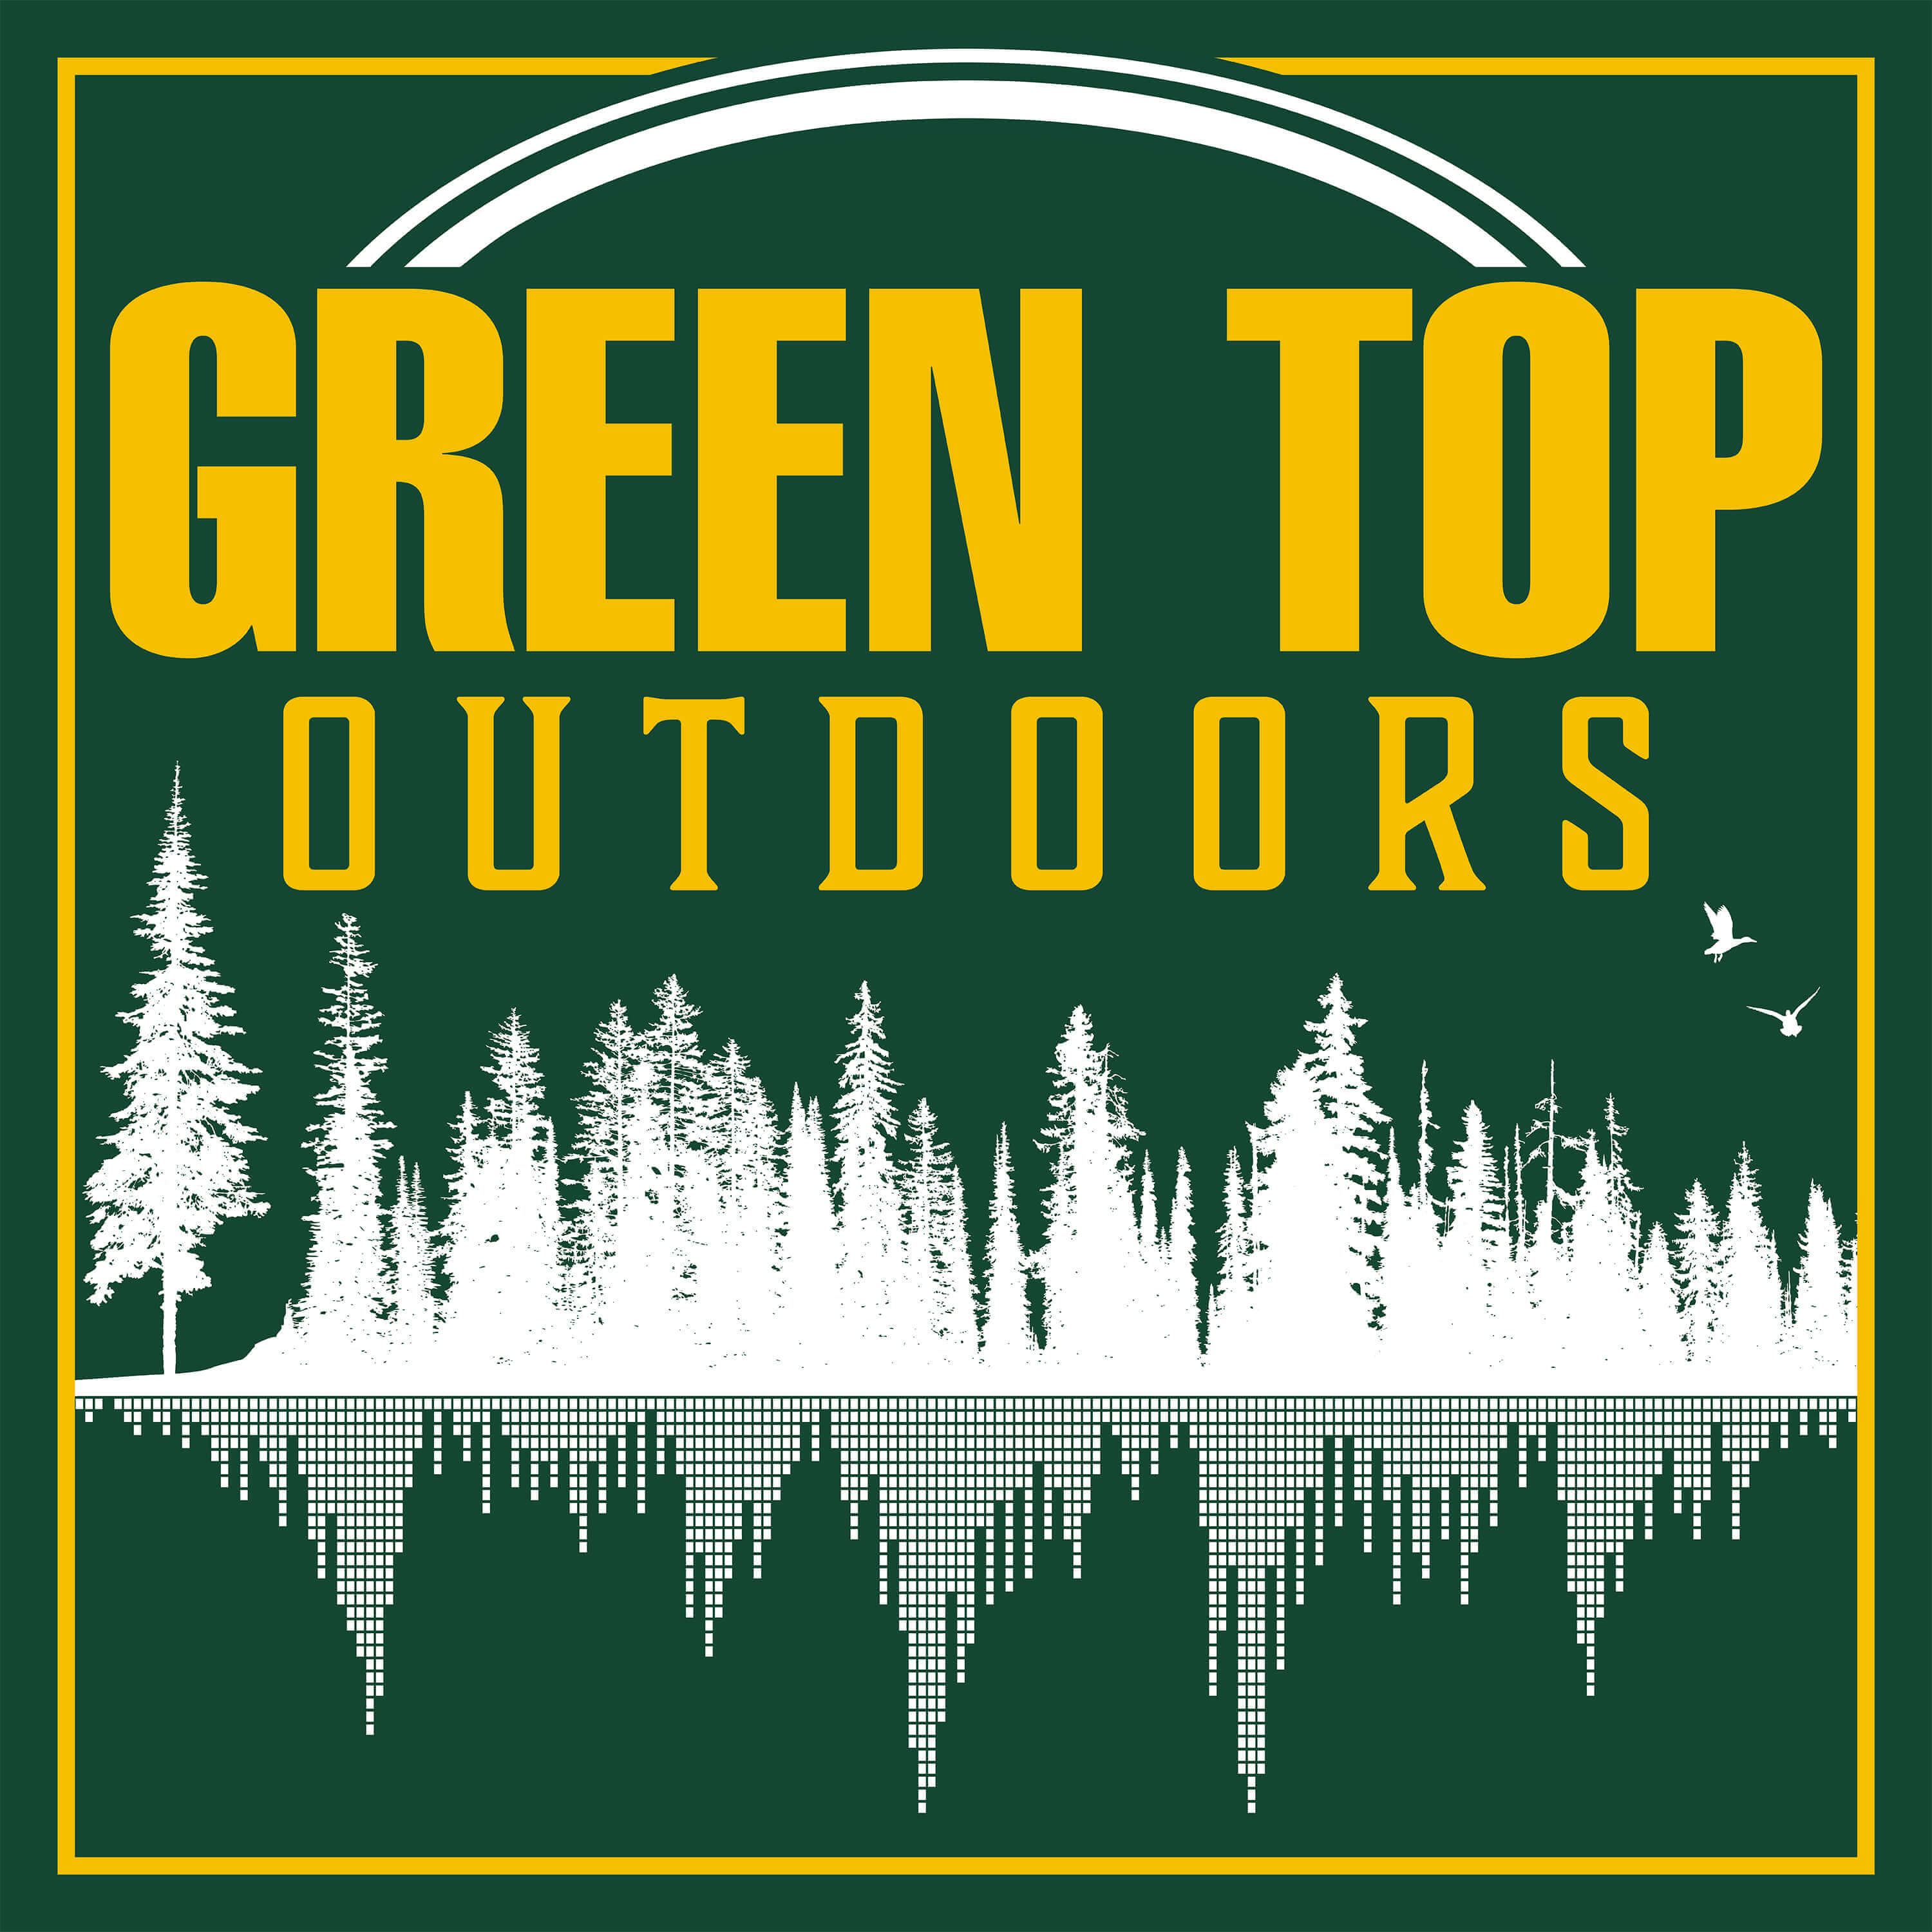 Artwork for Green Top Outdoors